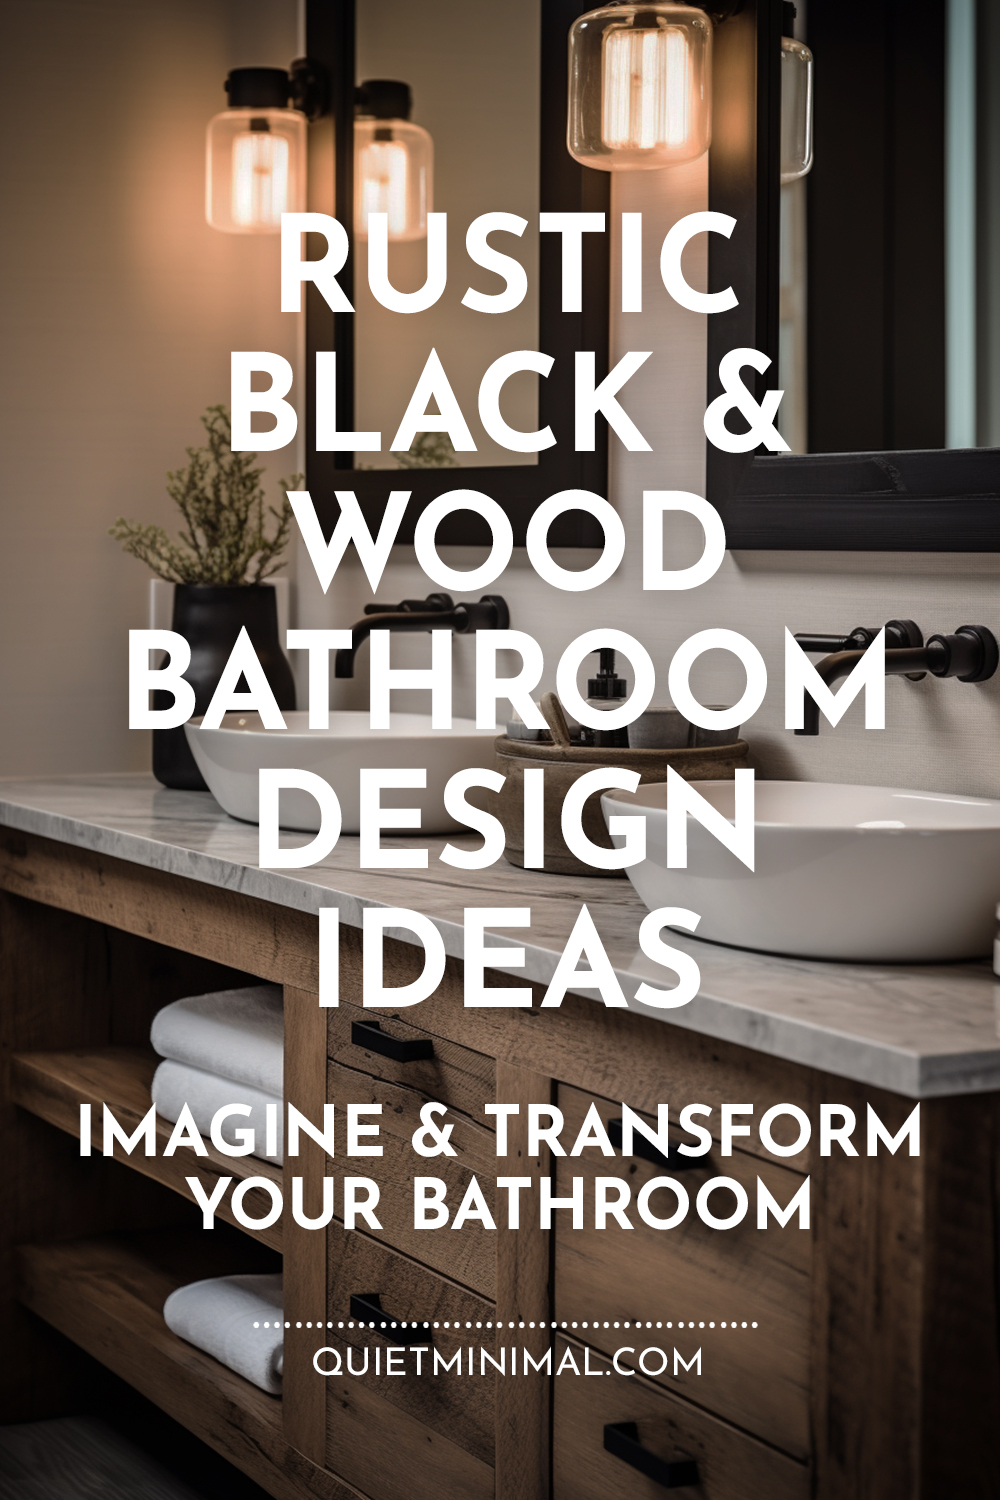 Rustic retreat with black and wood bathroom design ideas.